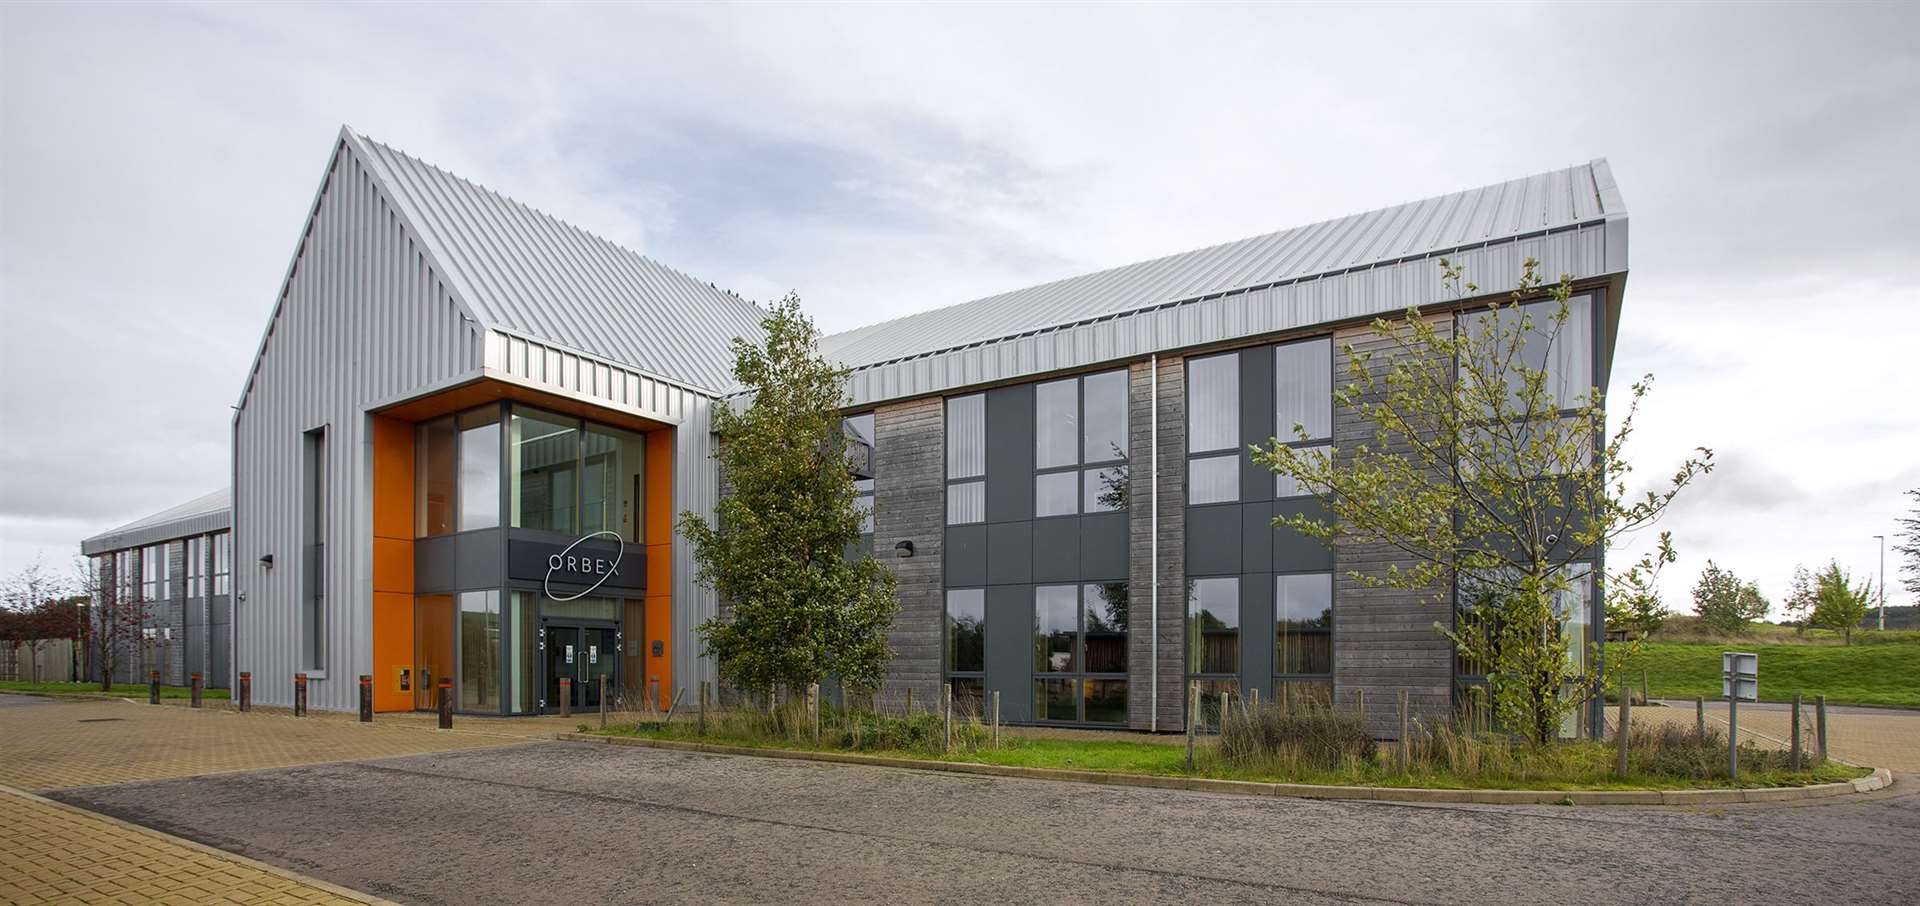 Orbex's offices on the Forres Enterprise Park.